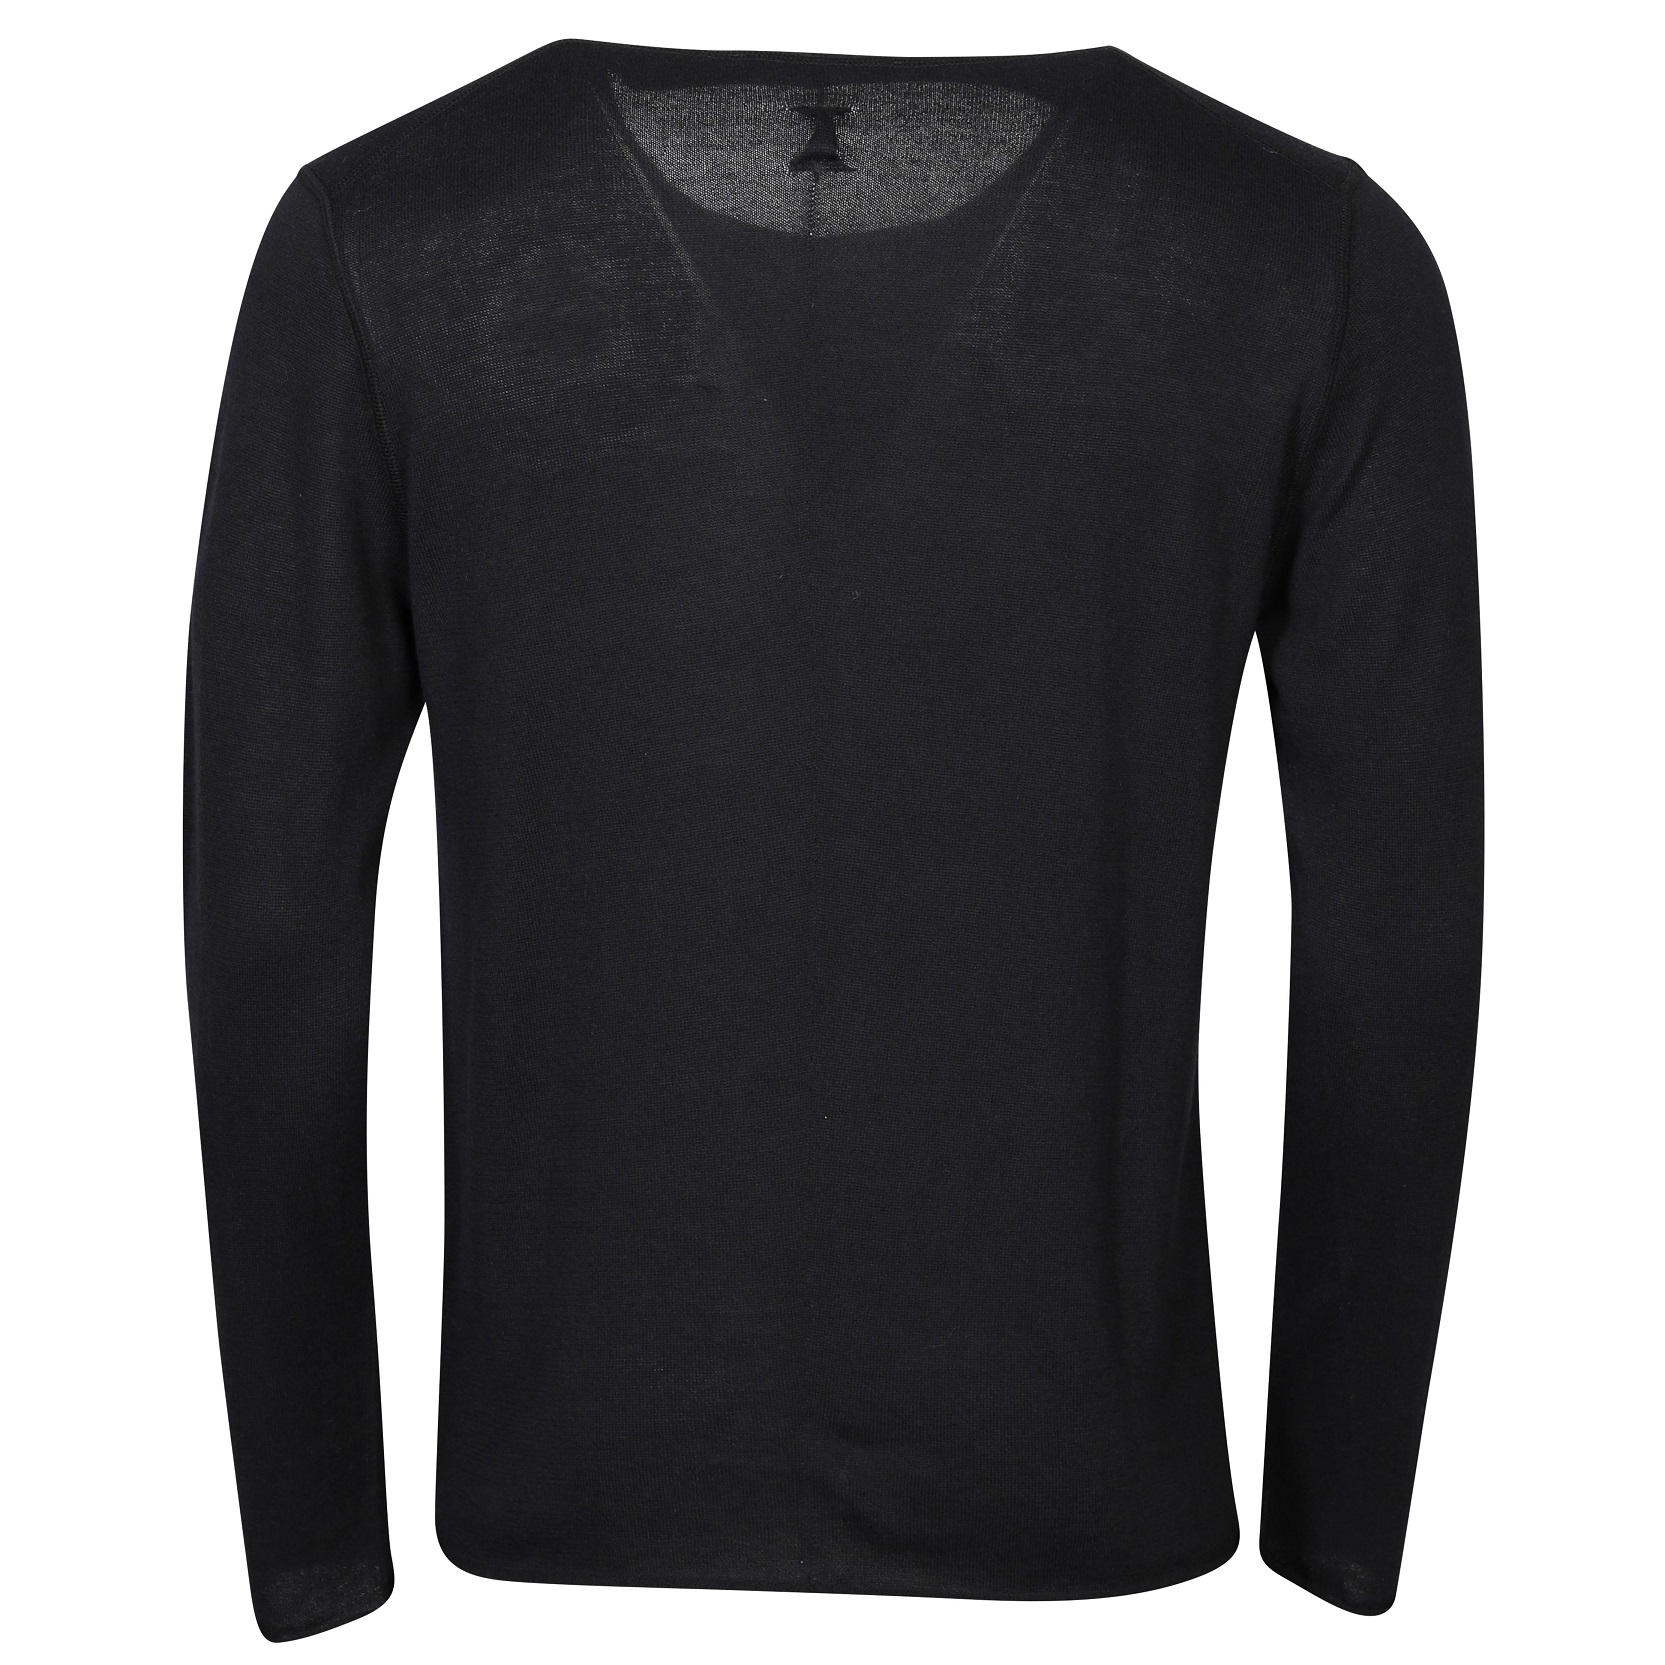 Hannes Roether Summer Knit Pullover in Black